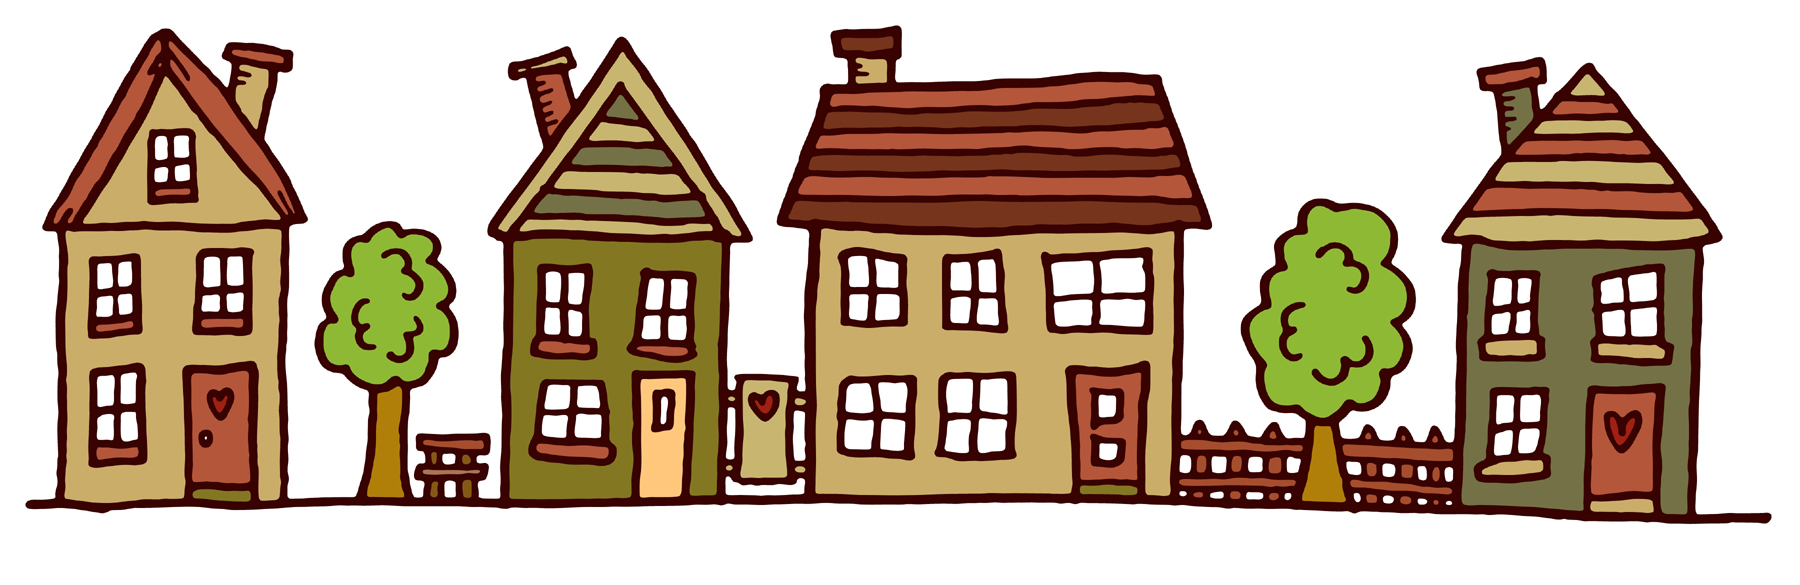 Images For Row Of Houses Clip - Clip Art Of Houses